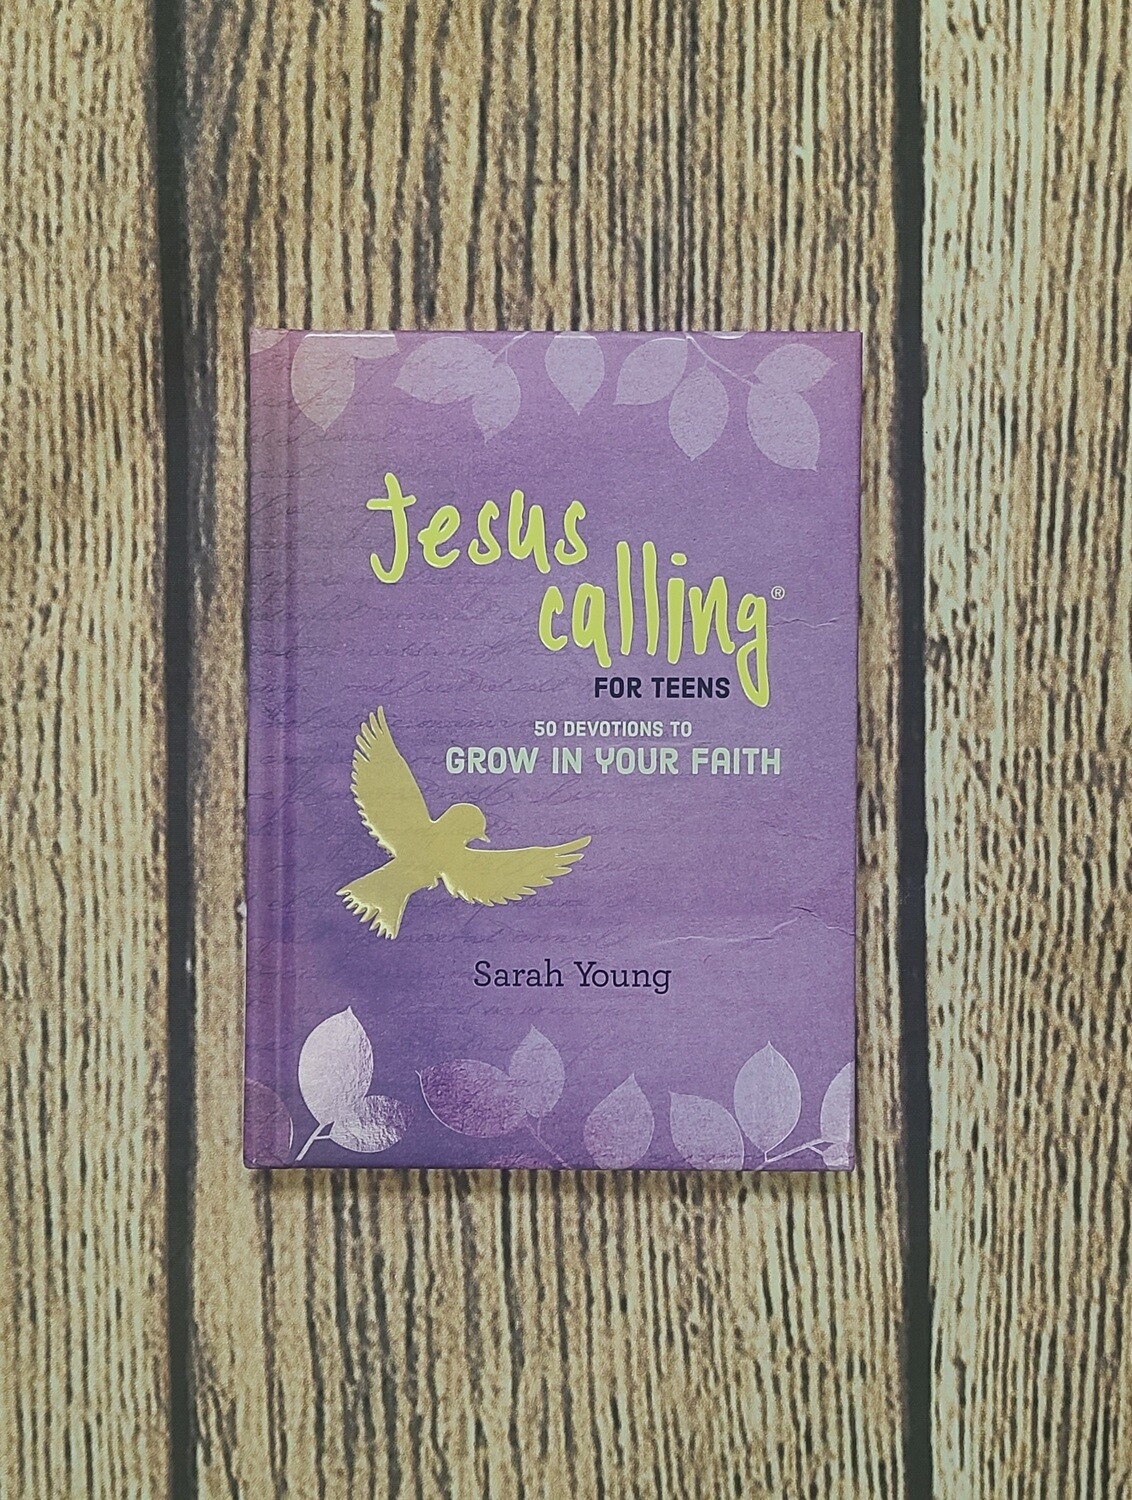 Jesus Calling for Teens: 50 Devotions to Grow in Your Faith by Sarah Young